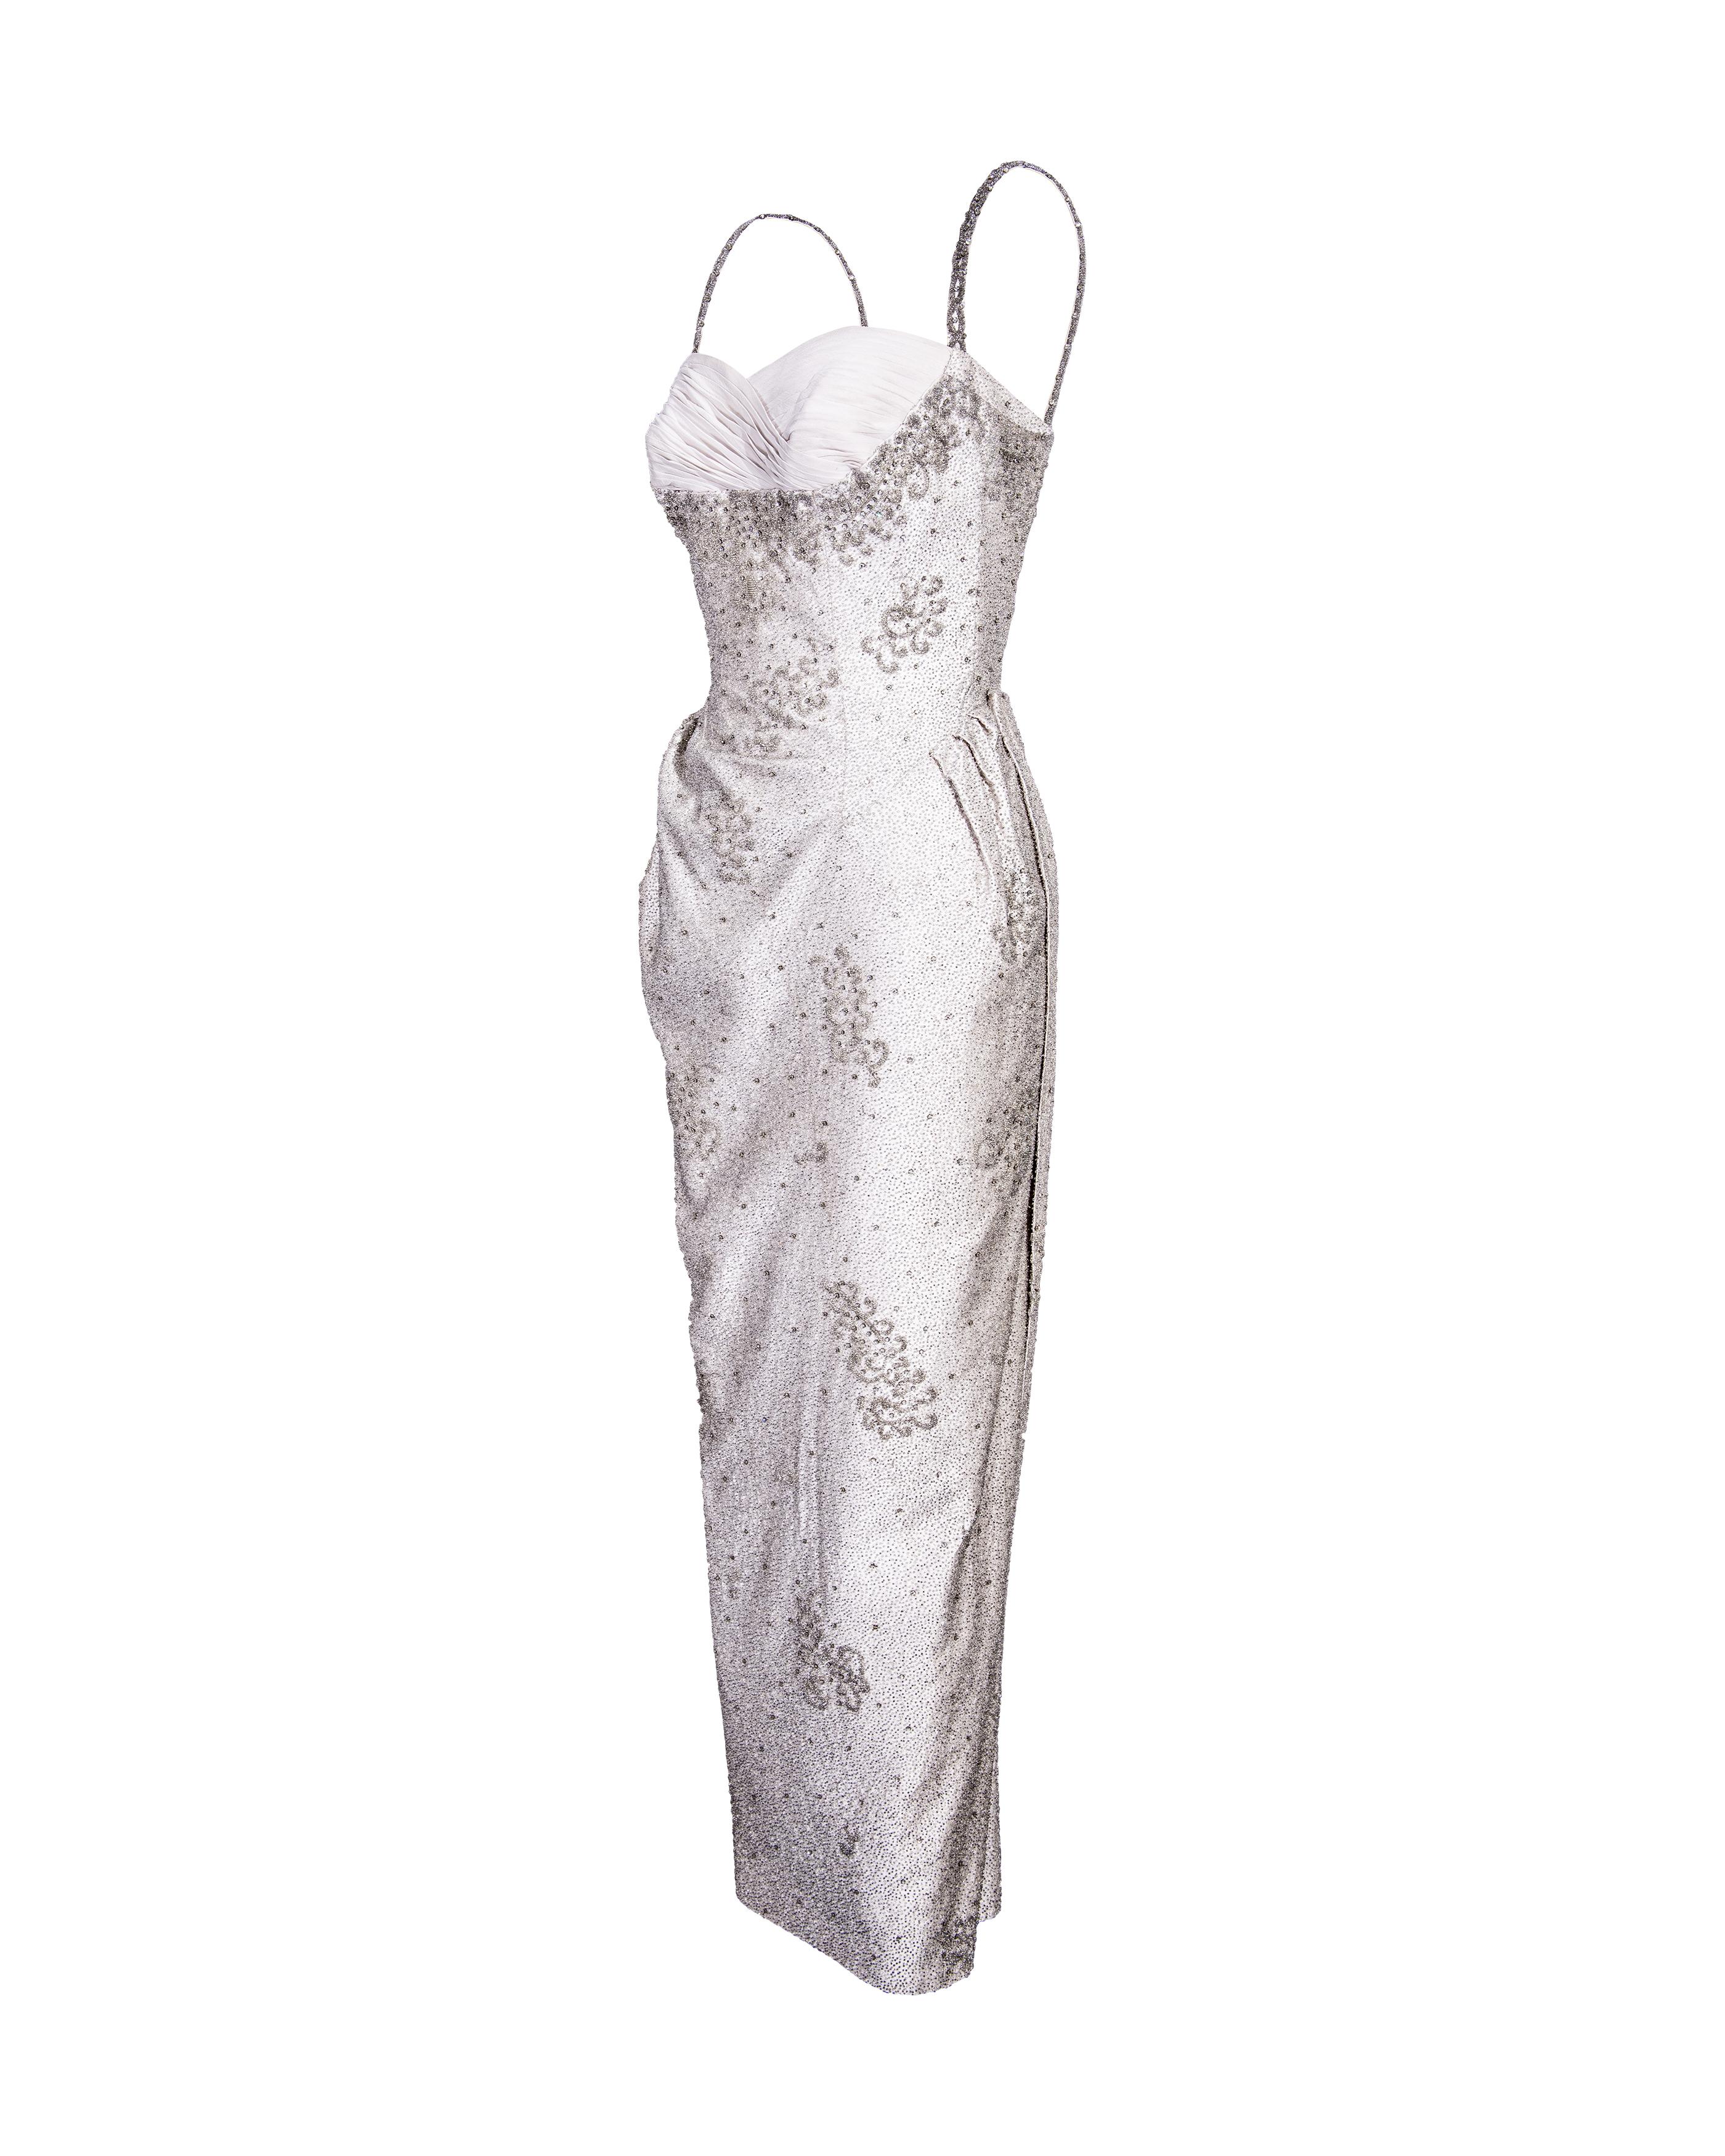 c. 1958 Pirovano Milano (Special Vintage) pale gray fully embellished gown with filigree details. Extremely special hand-embellished gown with full beading throughout and raised silver filigree details, and fully embellished straps. Heather gray